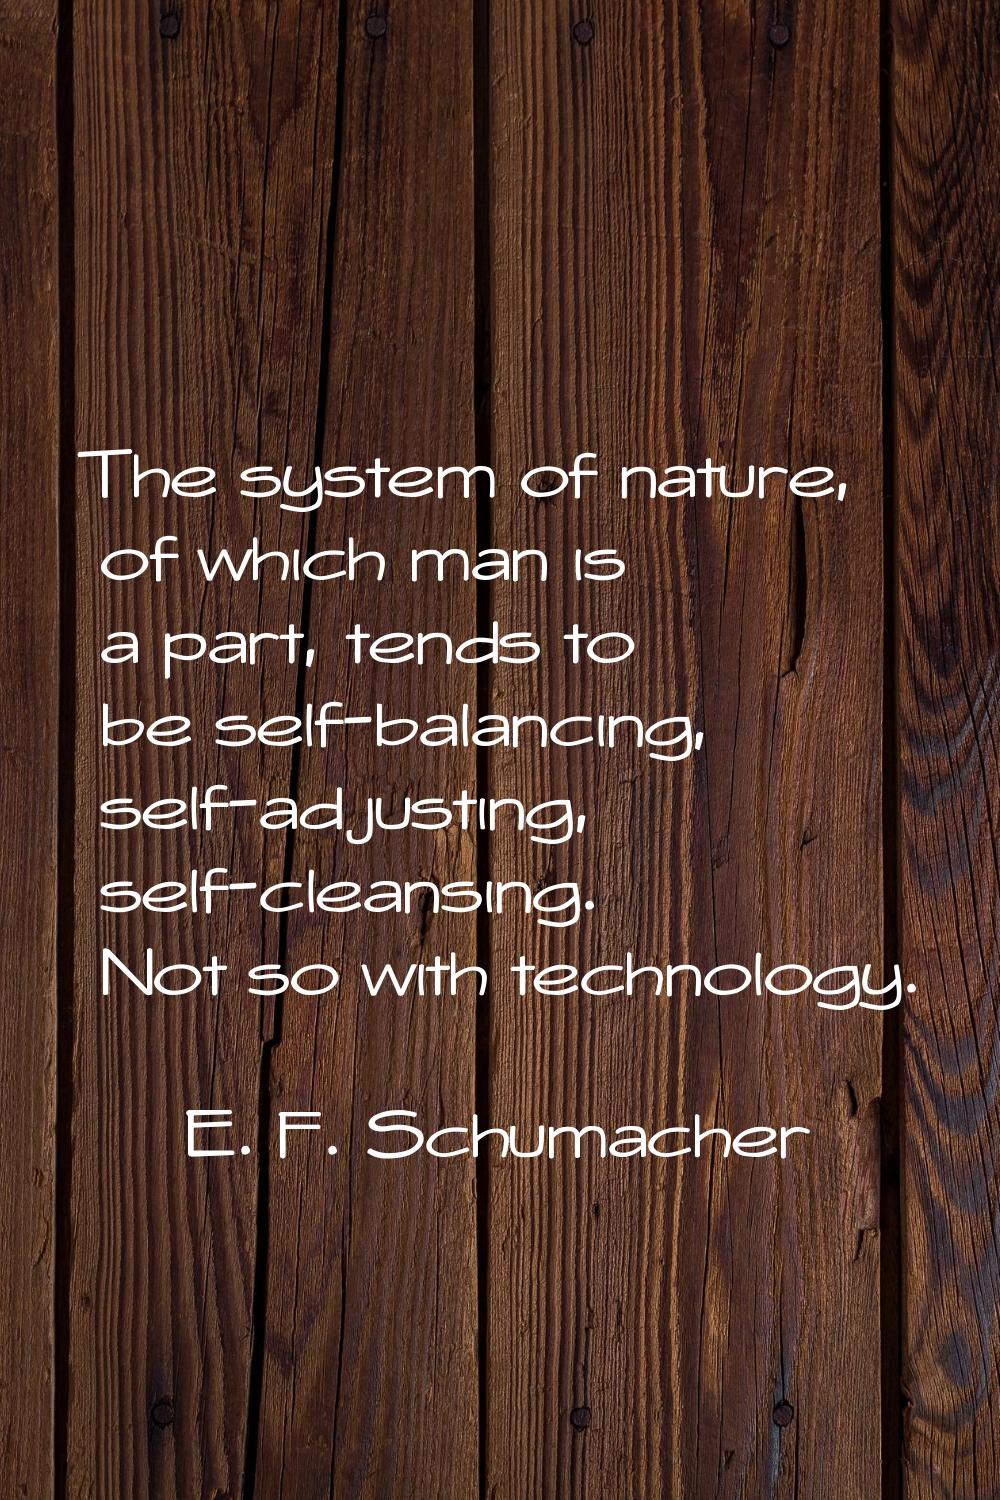 The system of nature, of which man is a part, tends to be self-balancing, self-adjusting, self-clea